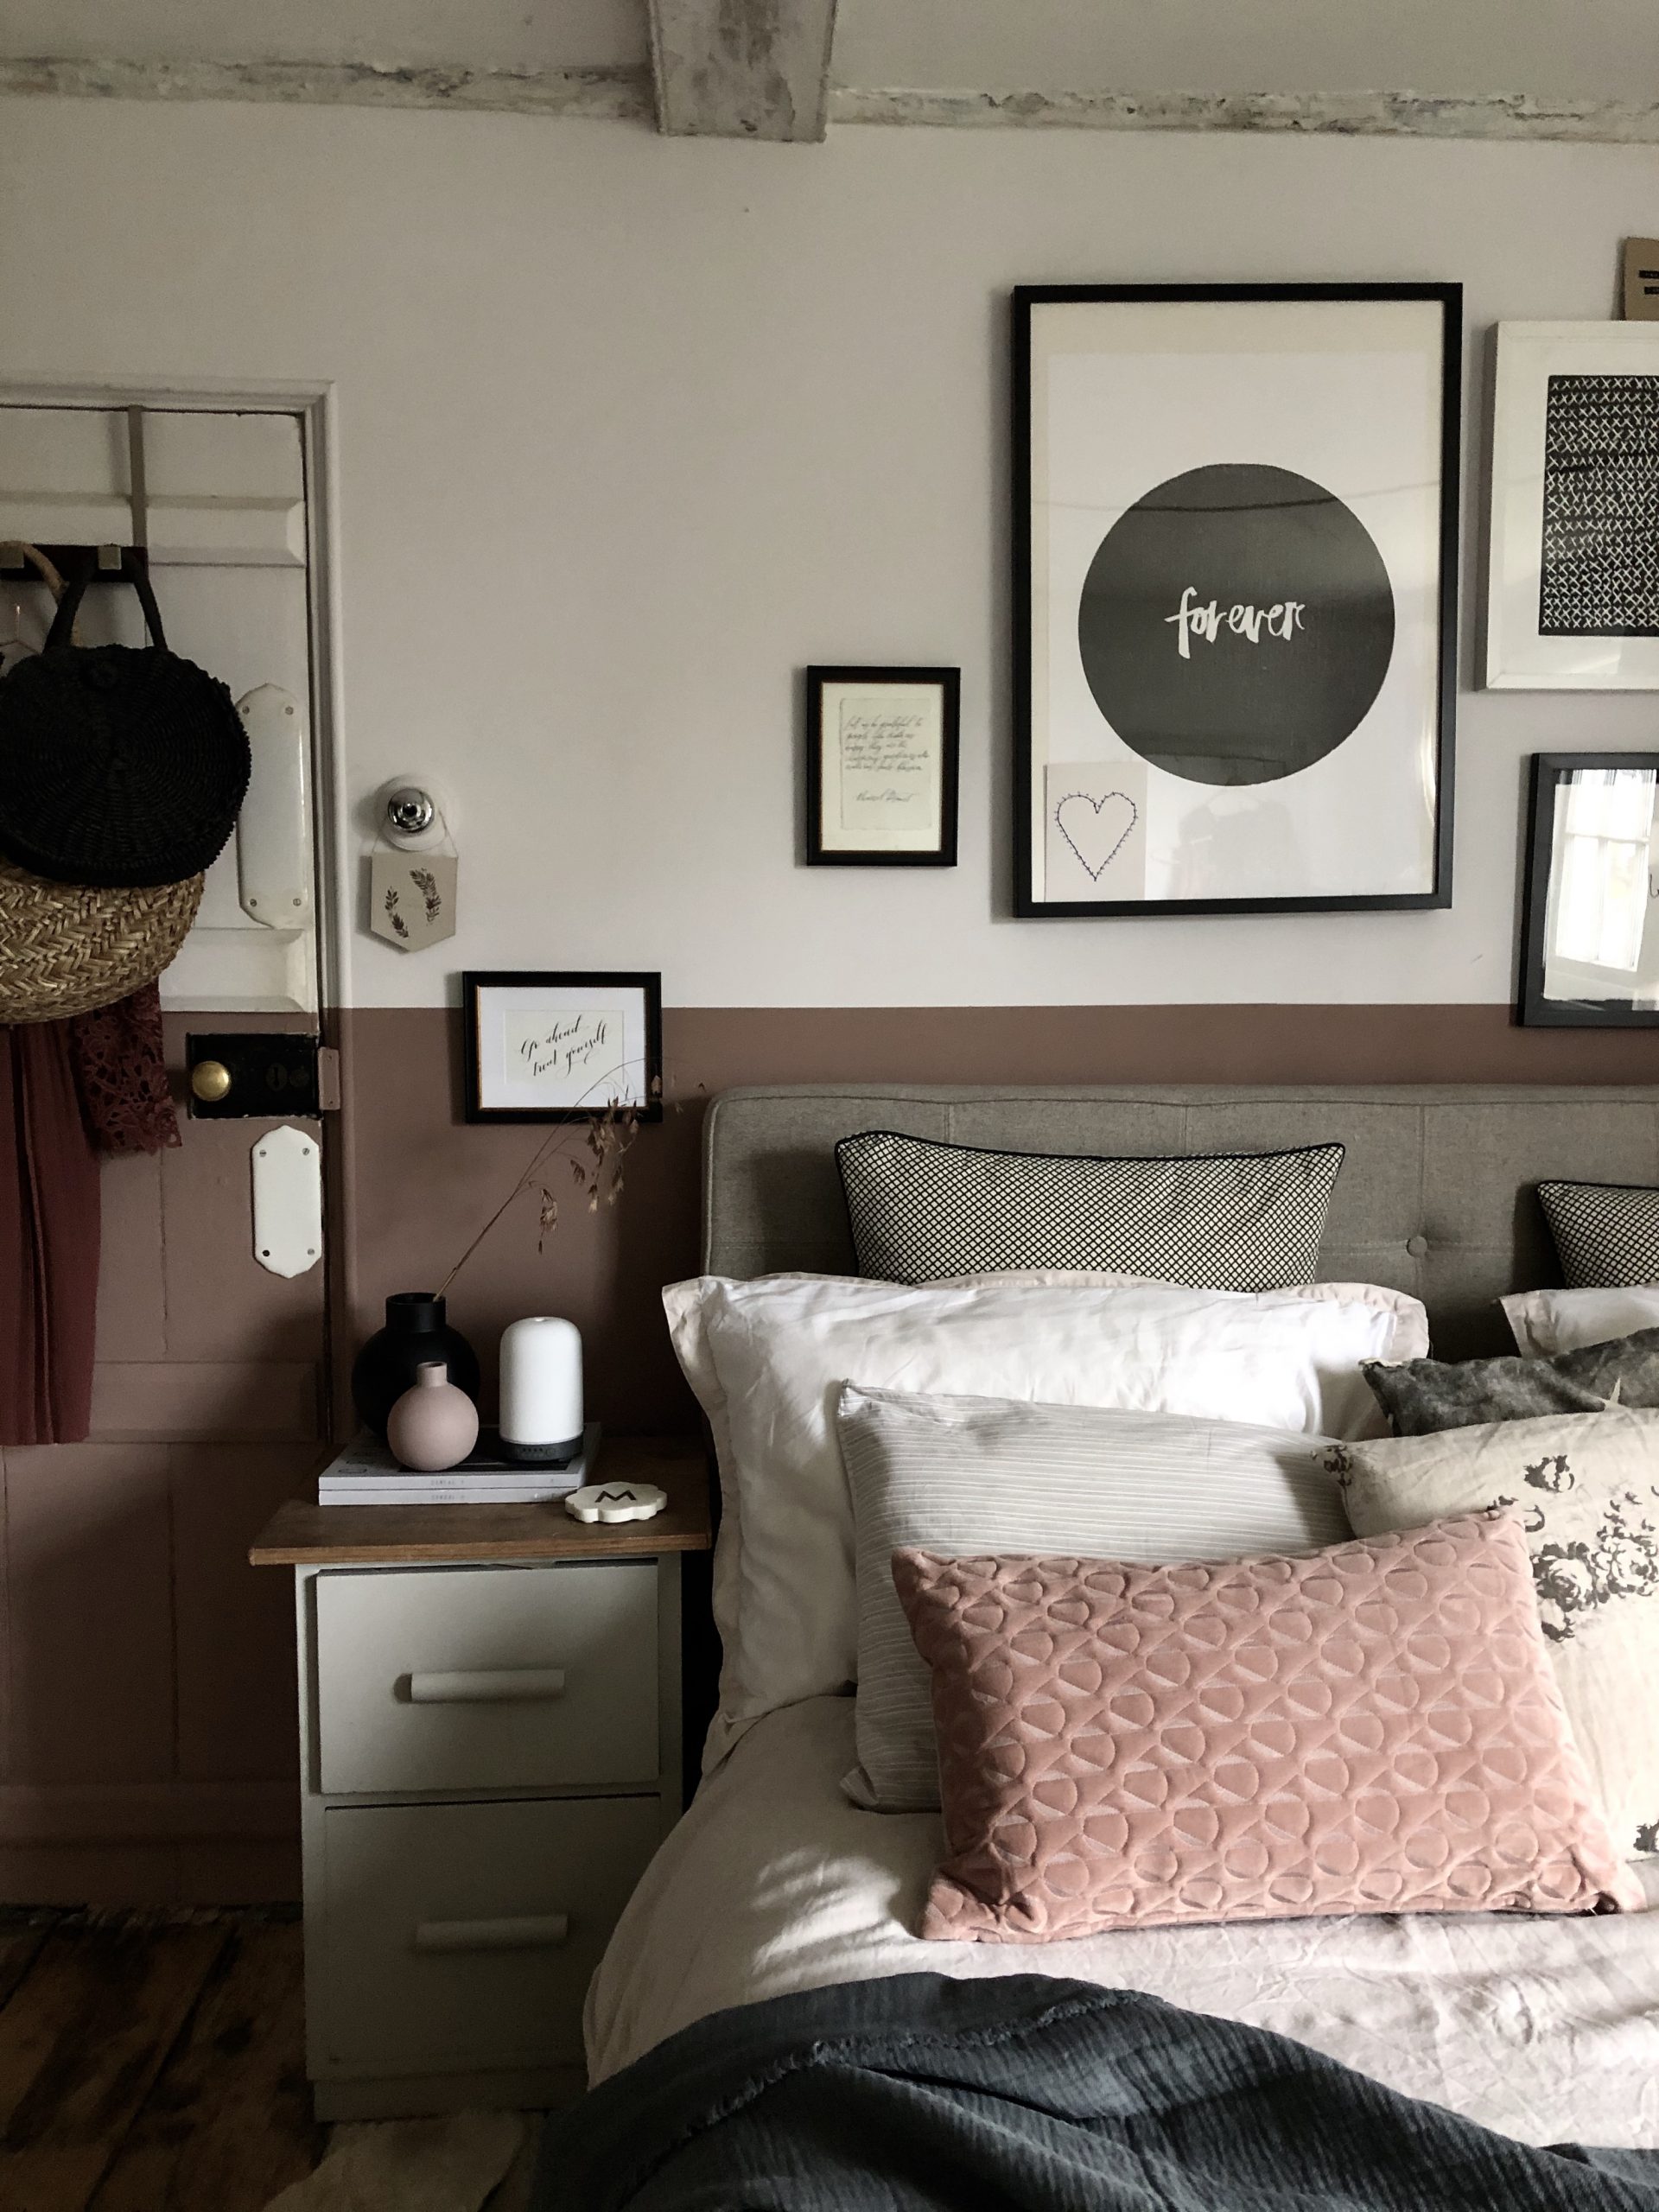 had height wall painted in Paint and Paper Library Rouge II. A dusky pinky terracott shade adds contrast to a light upholstered bed, dressed in natural washed linens.